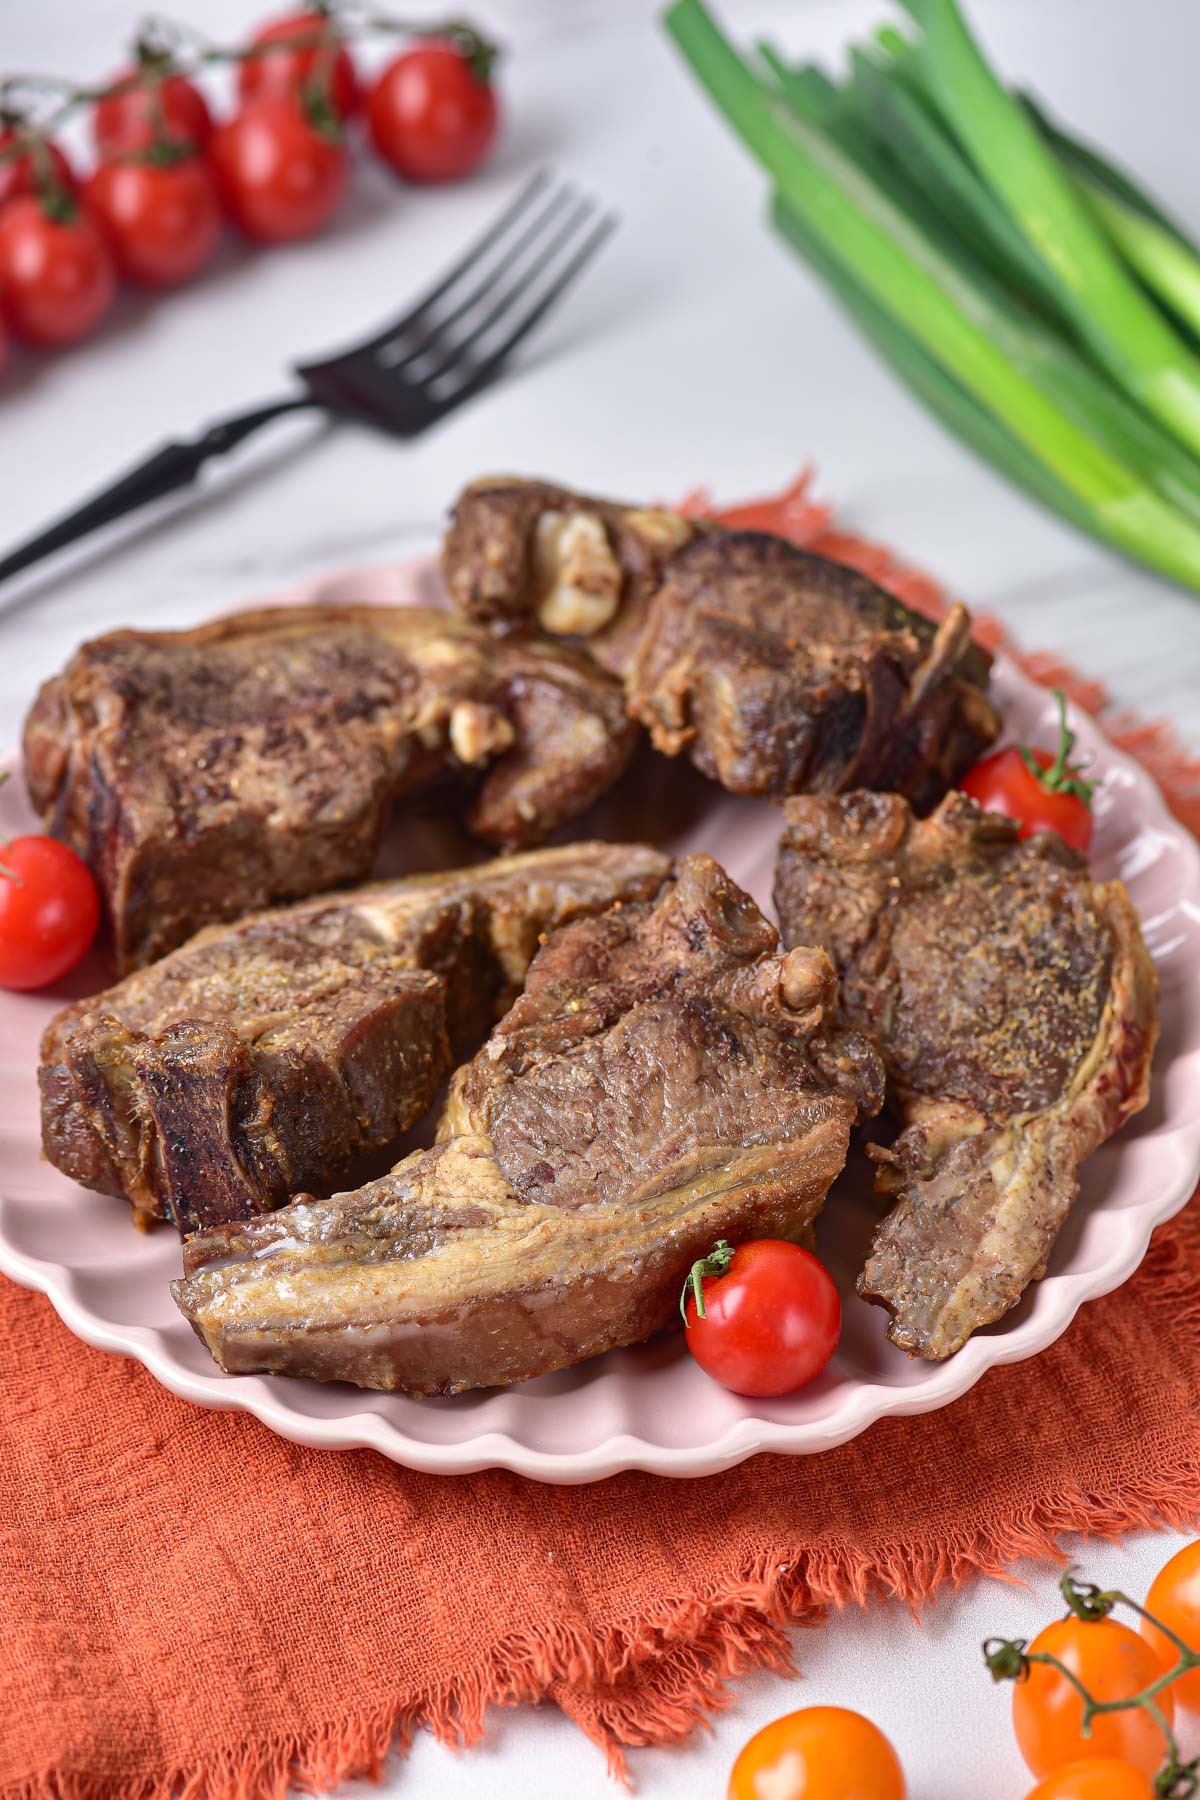 The completed air fryer lamb chops served on a white plate